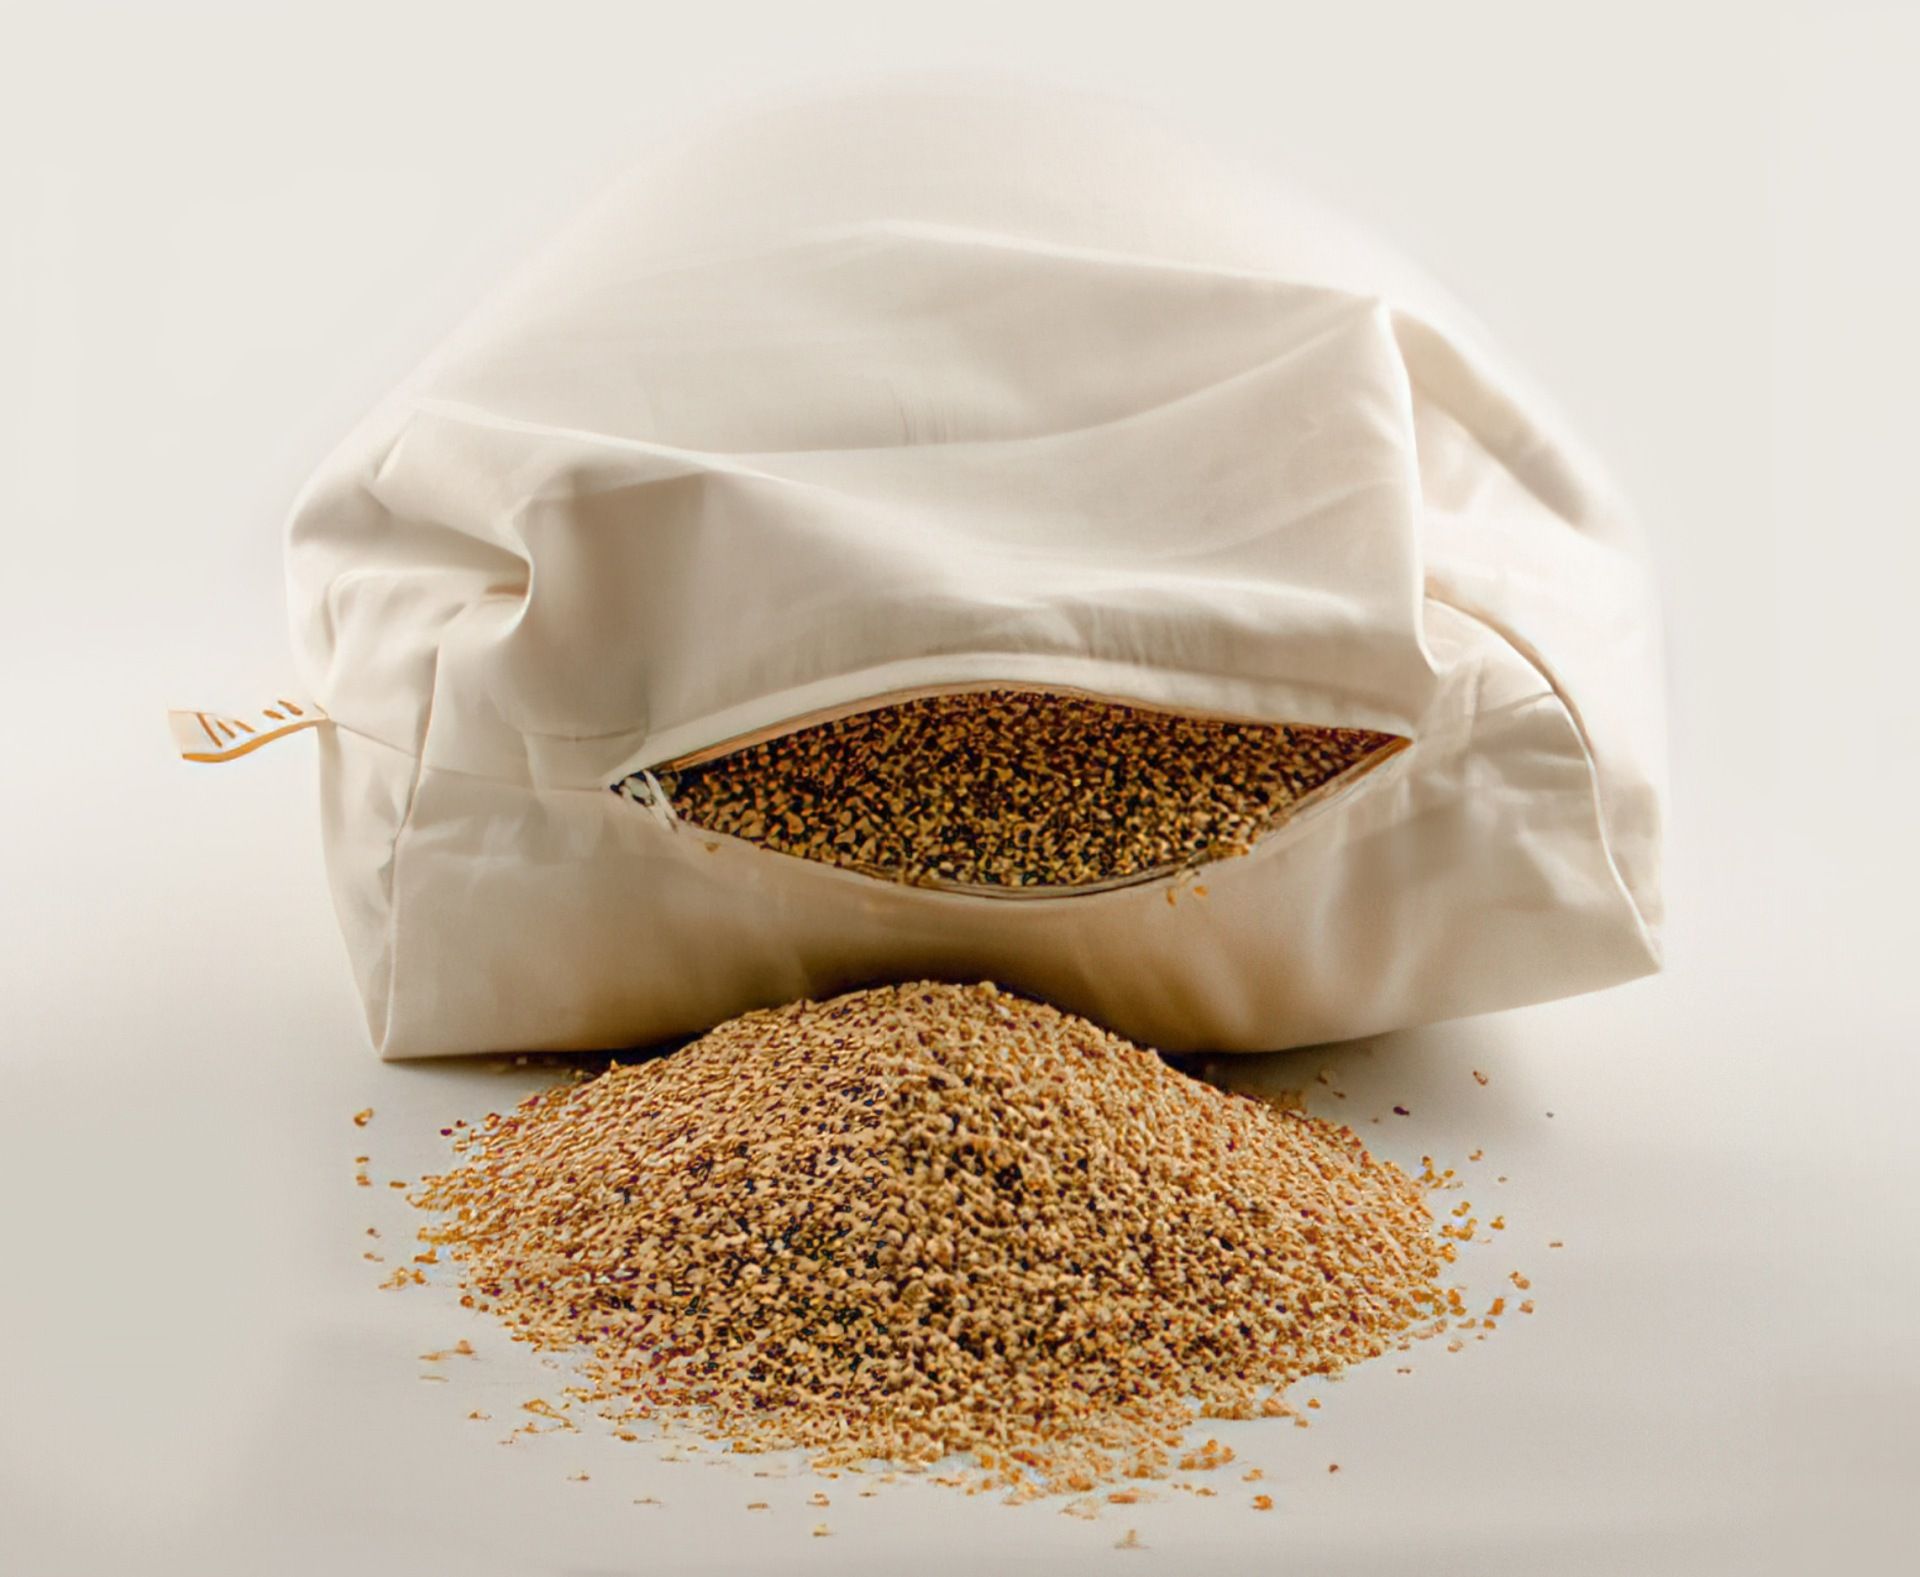 Organic Buckwheat Hulls are a natural product ideal for Bean Bag